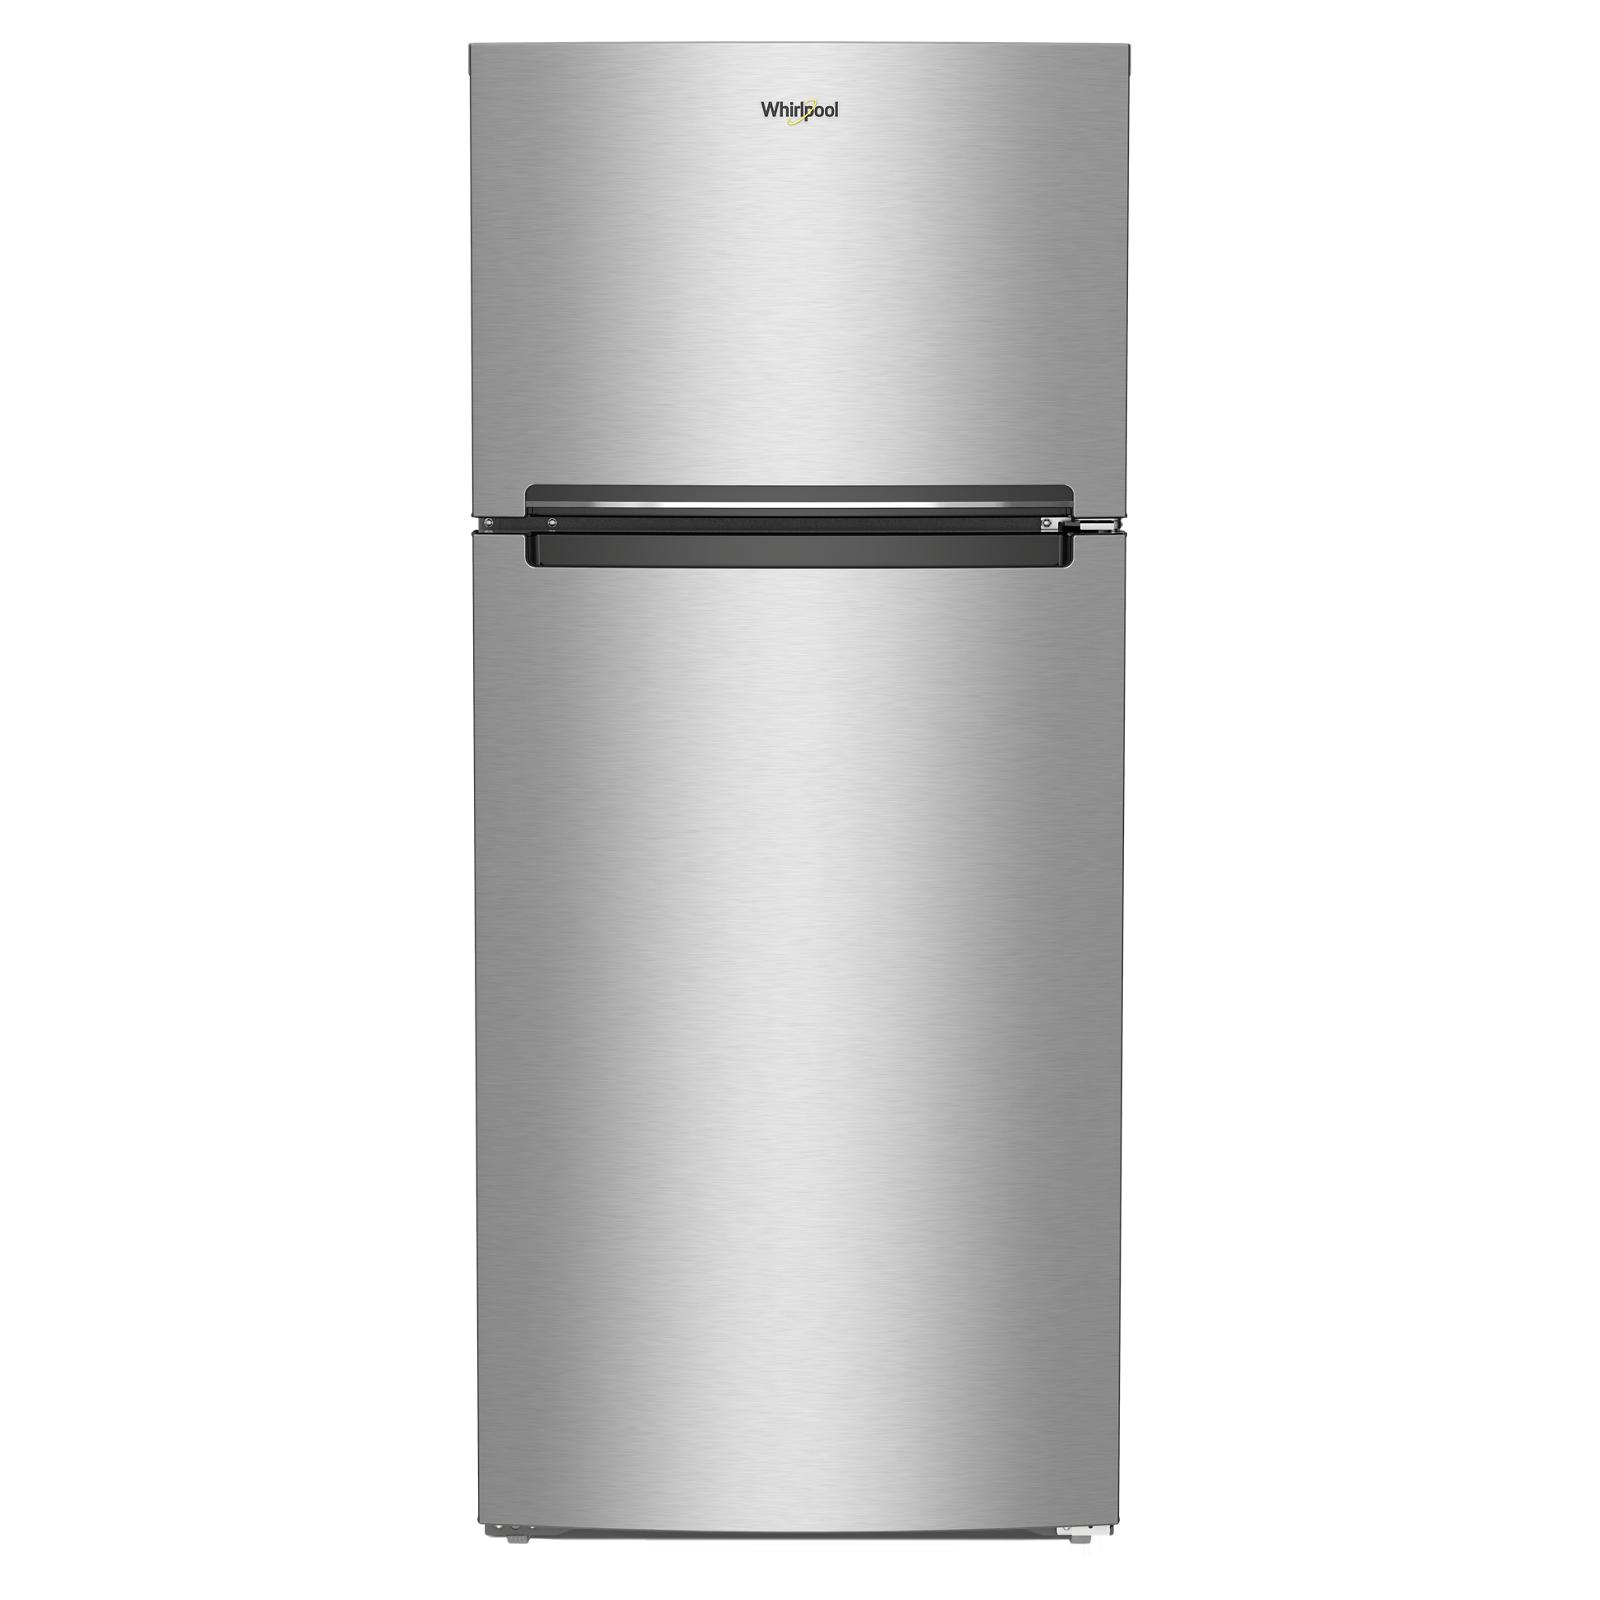 Whirlpool - 28.125 Inch 16.6 cu. ft Top Mount Refrigerator in Stainless - WRTX5028PM